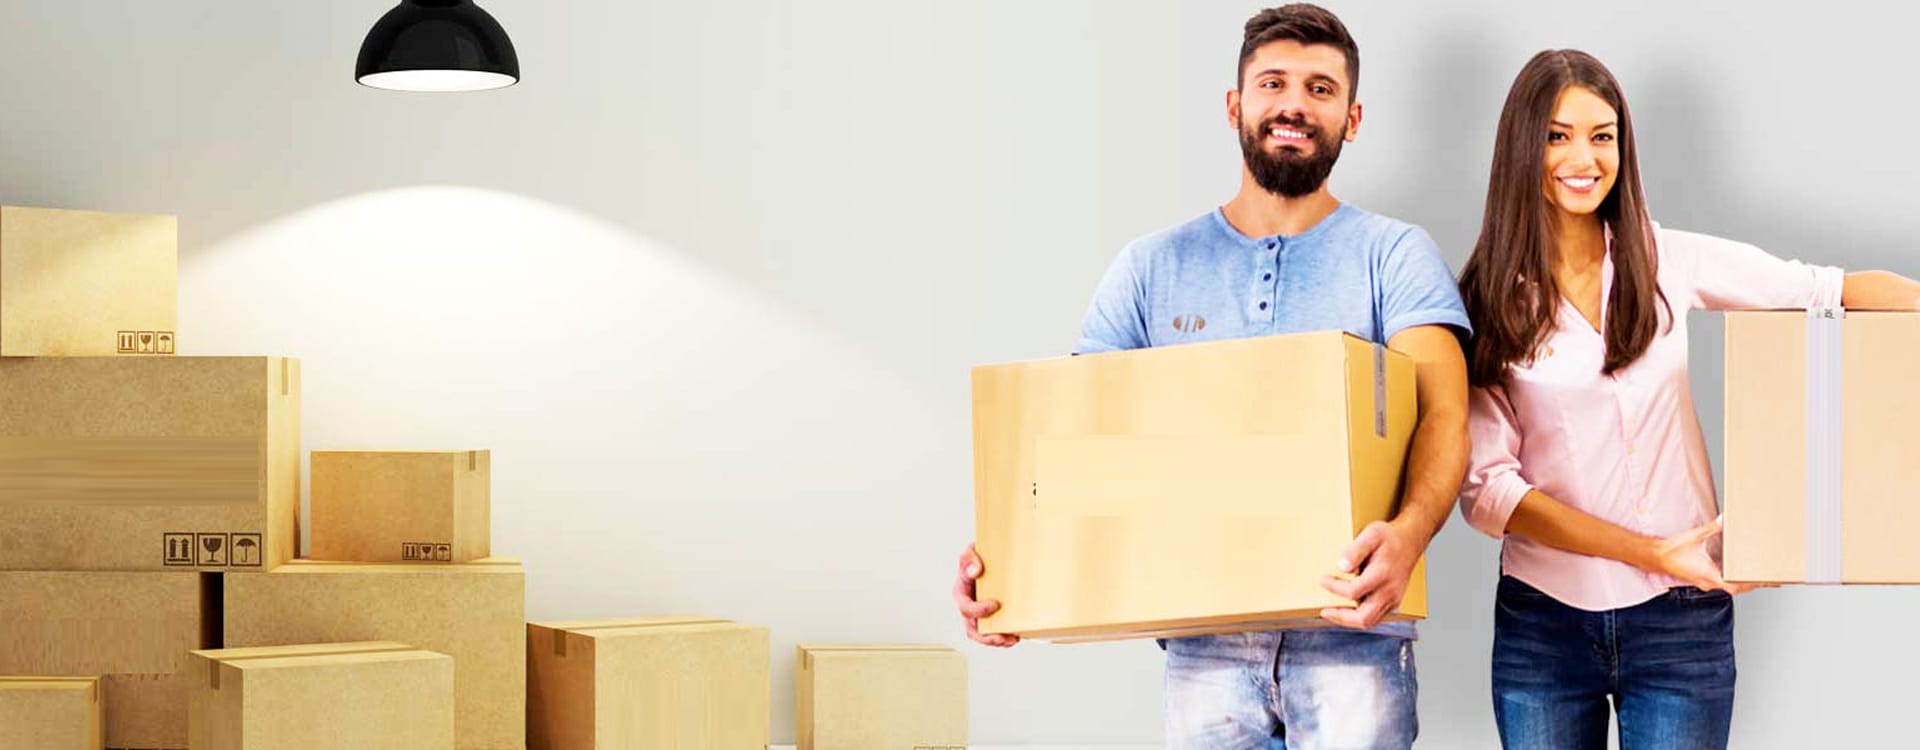 Packers and Movers in Peddar Road Mumbai